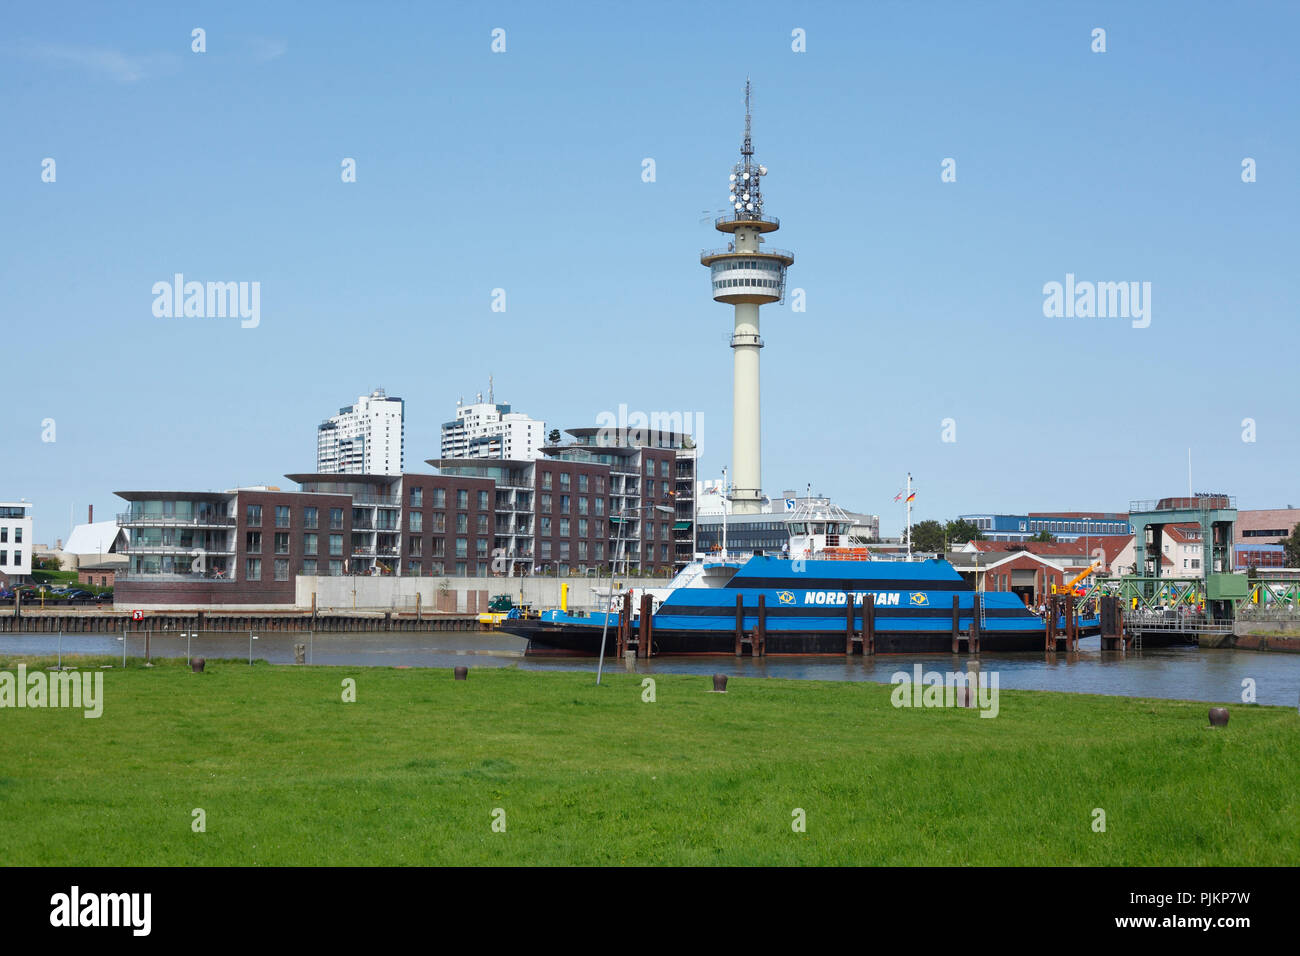 Modern architecture, radio tower and car ferry to Nordenham at the Geeste, Bremerhaven, Bremen, Germany, Europe Stock Photo